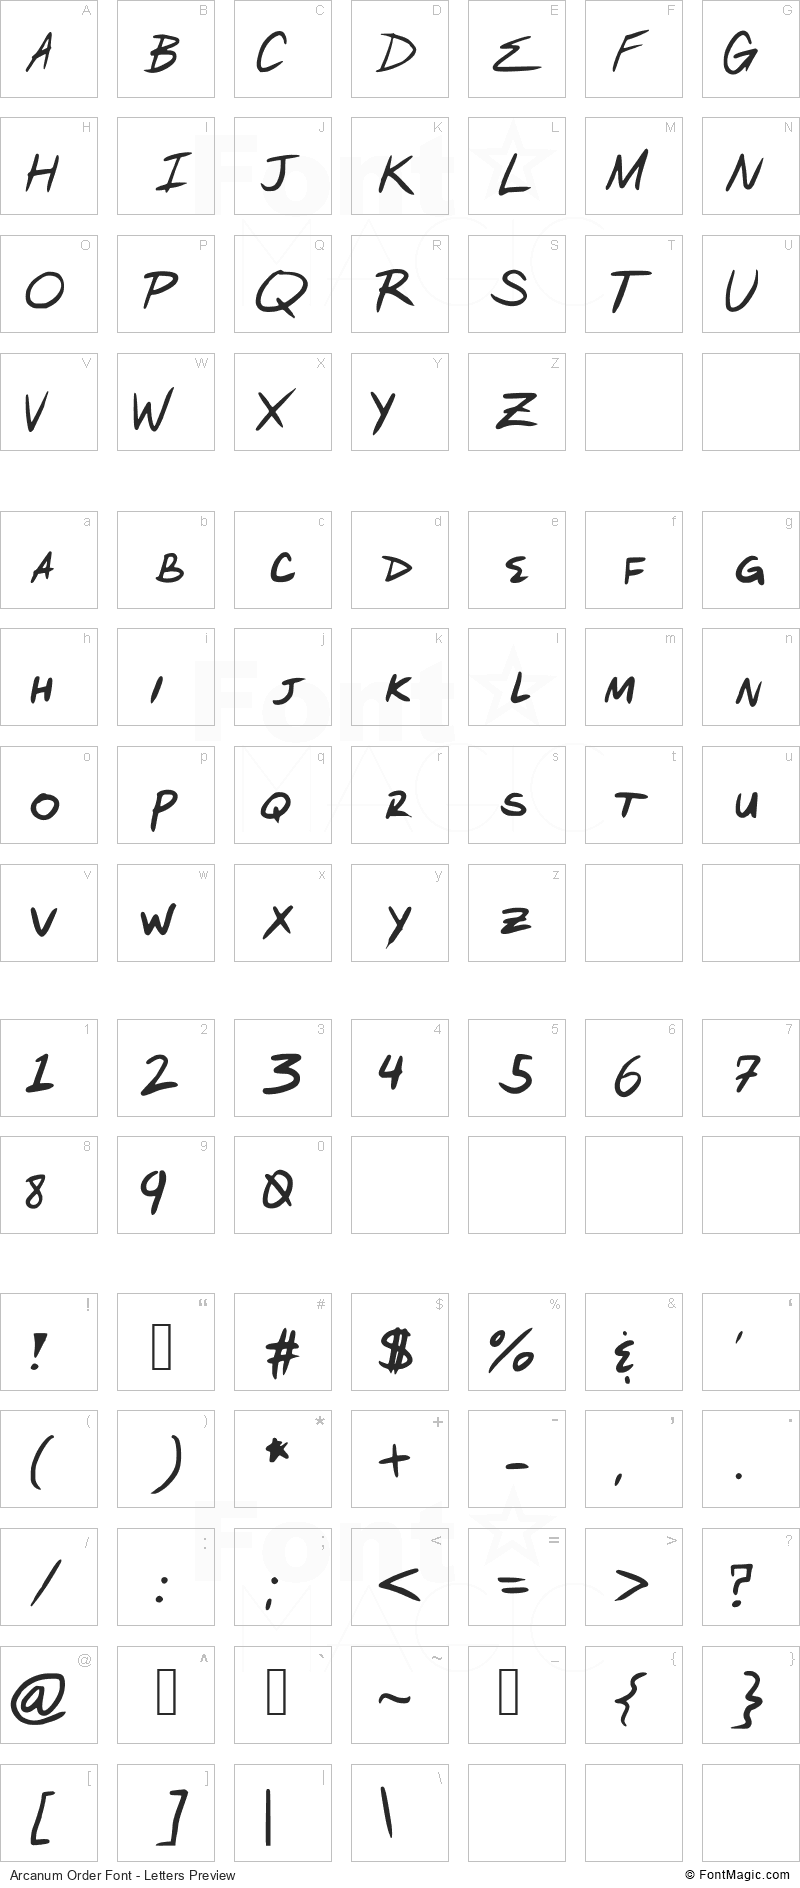 Arcanum Order Font - All Latters Preview Chart